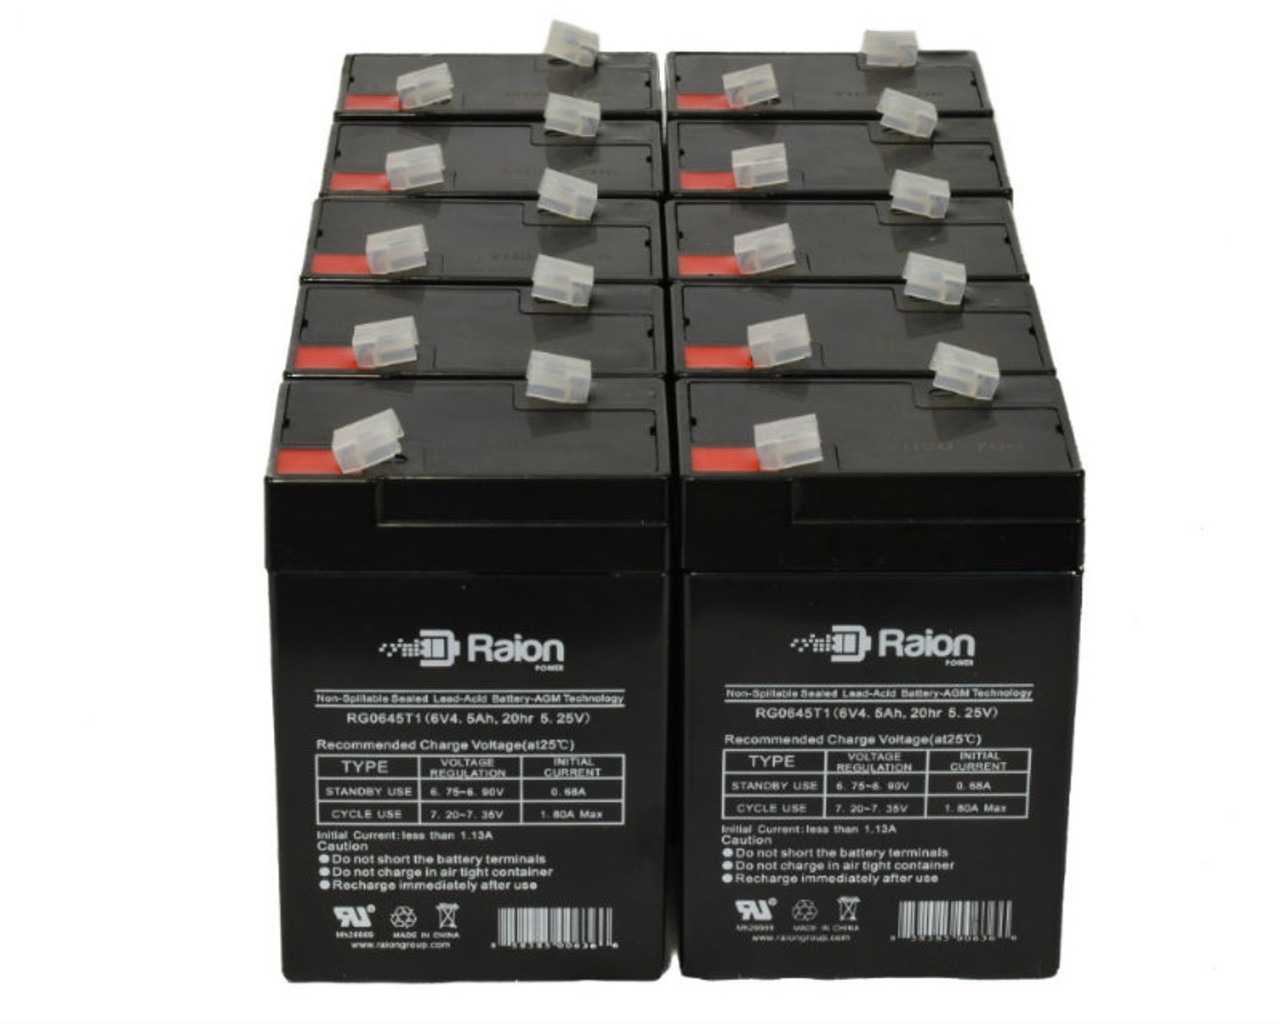 Raion Power 6V 4.5Ah Replacement Emergency Light Battery for Tork CYL1LA - 10 Pack